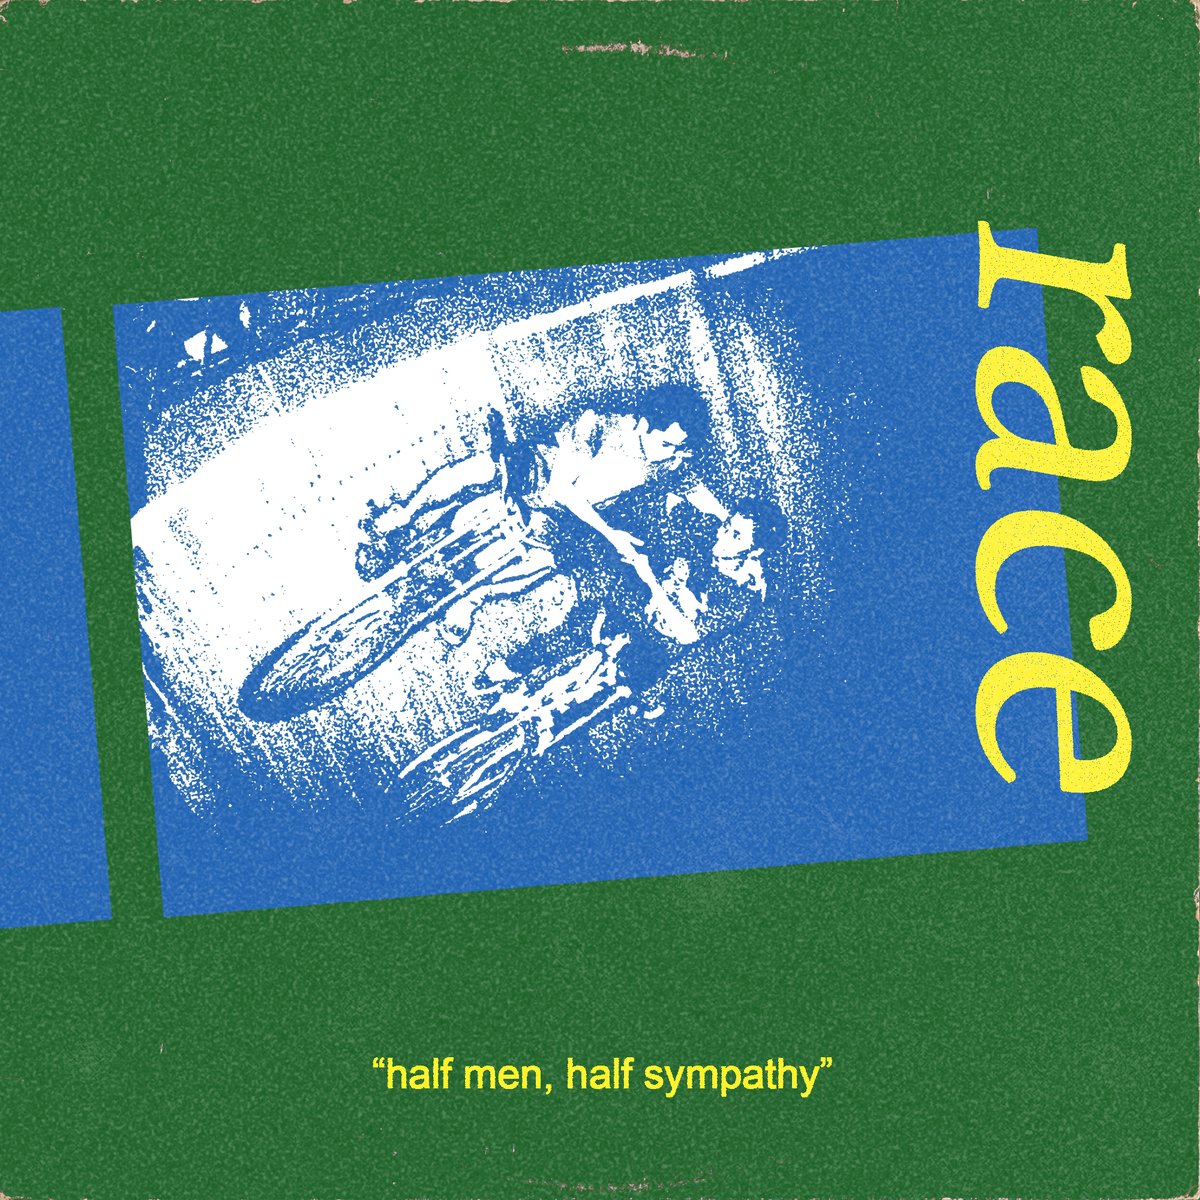 The 'Half Man, Half Sympathy' debut album by Race is out today on Chaotic Pop Records and our @subjangle label (CDr) and Faster Records (cassette) today !!! Claim a 15% discount using code 'race15' before 30.04.24 at the checkout link below subjangle.bandcamp.com/album/half-man…